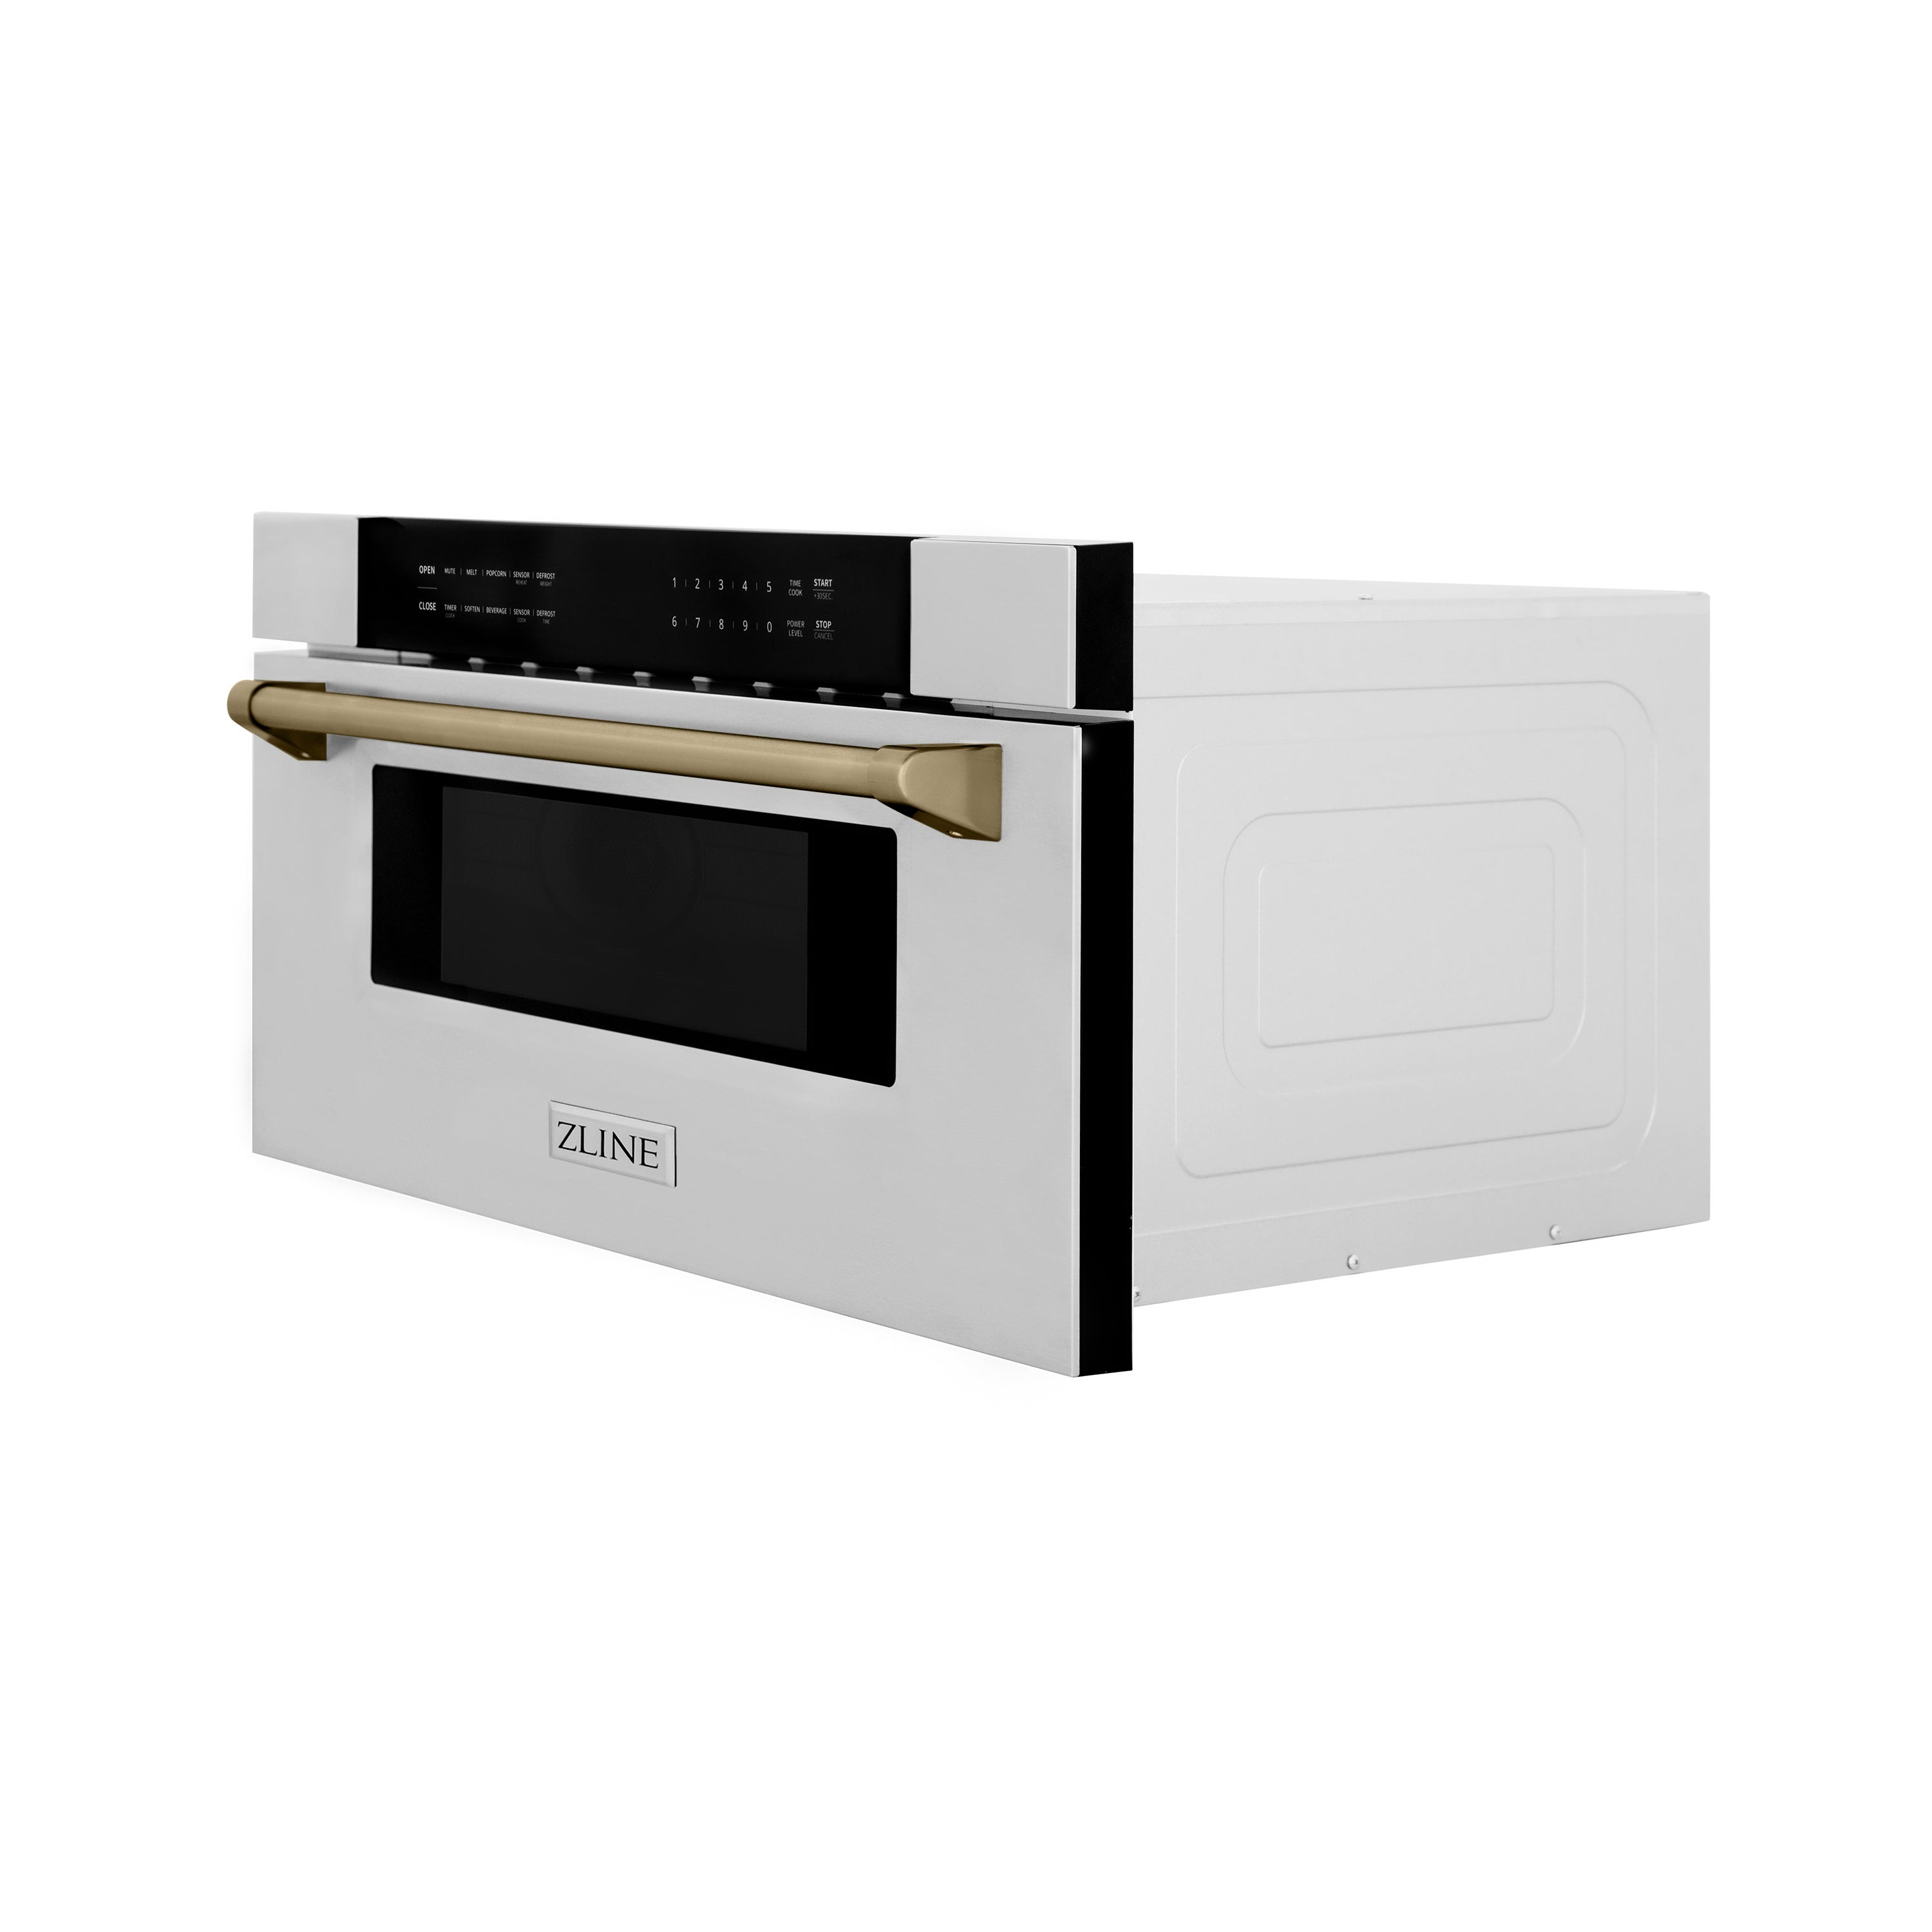 ZLINE Autograph Edition 30" 1.2 cu. ft. Built-In Microwave Drawer in Stainless Steel with Champagne Bronze Accents